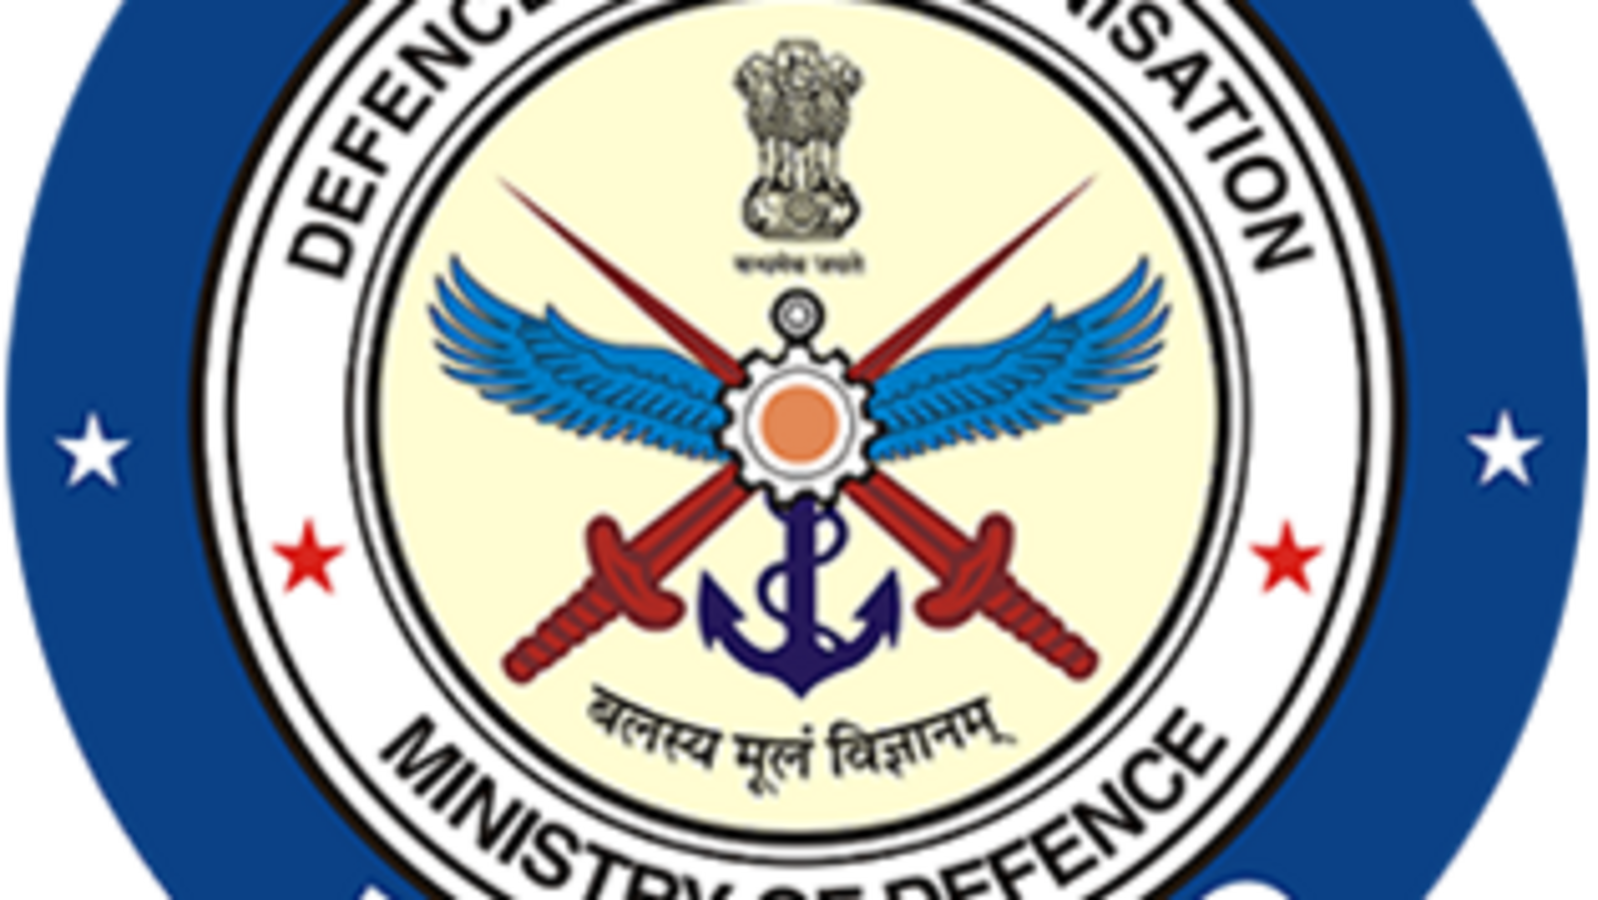 DRDO CEPTAM MTS Recruitment 2019 for 1817 posts cancelled, notice here